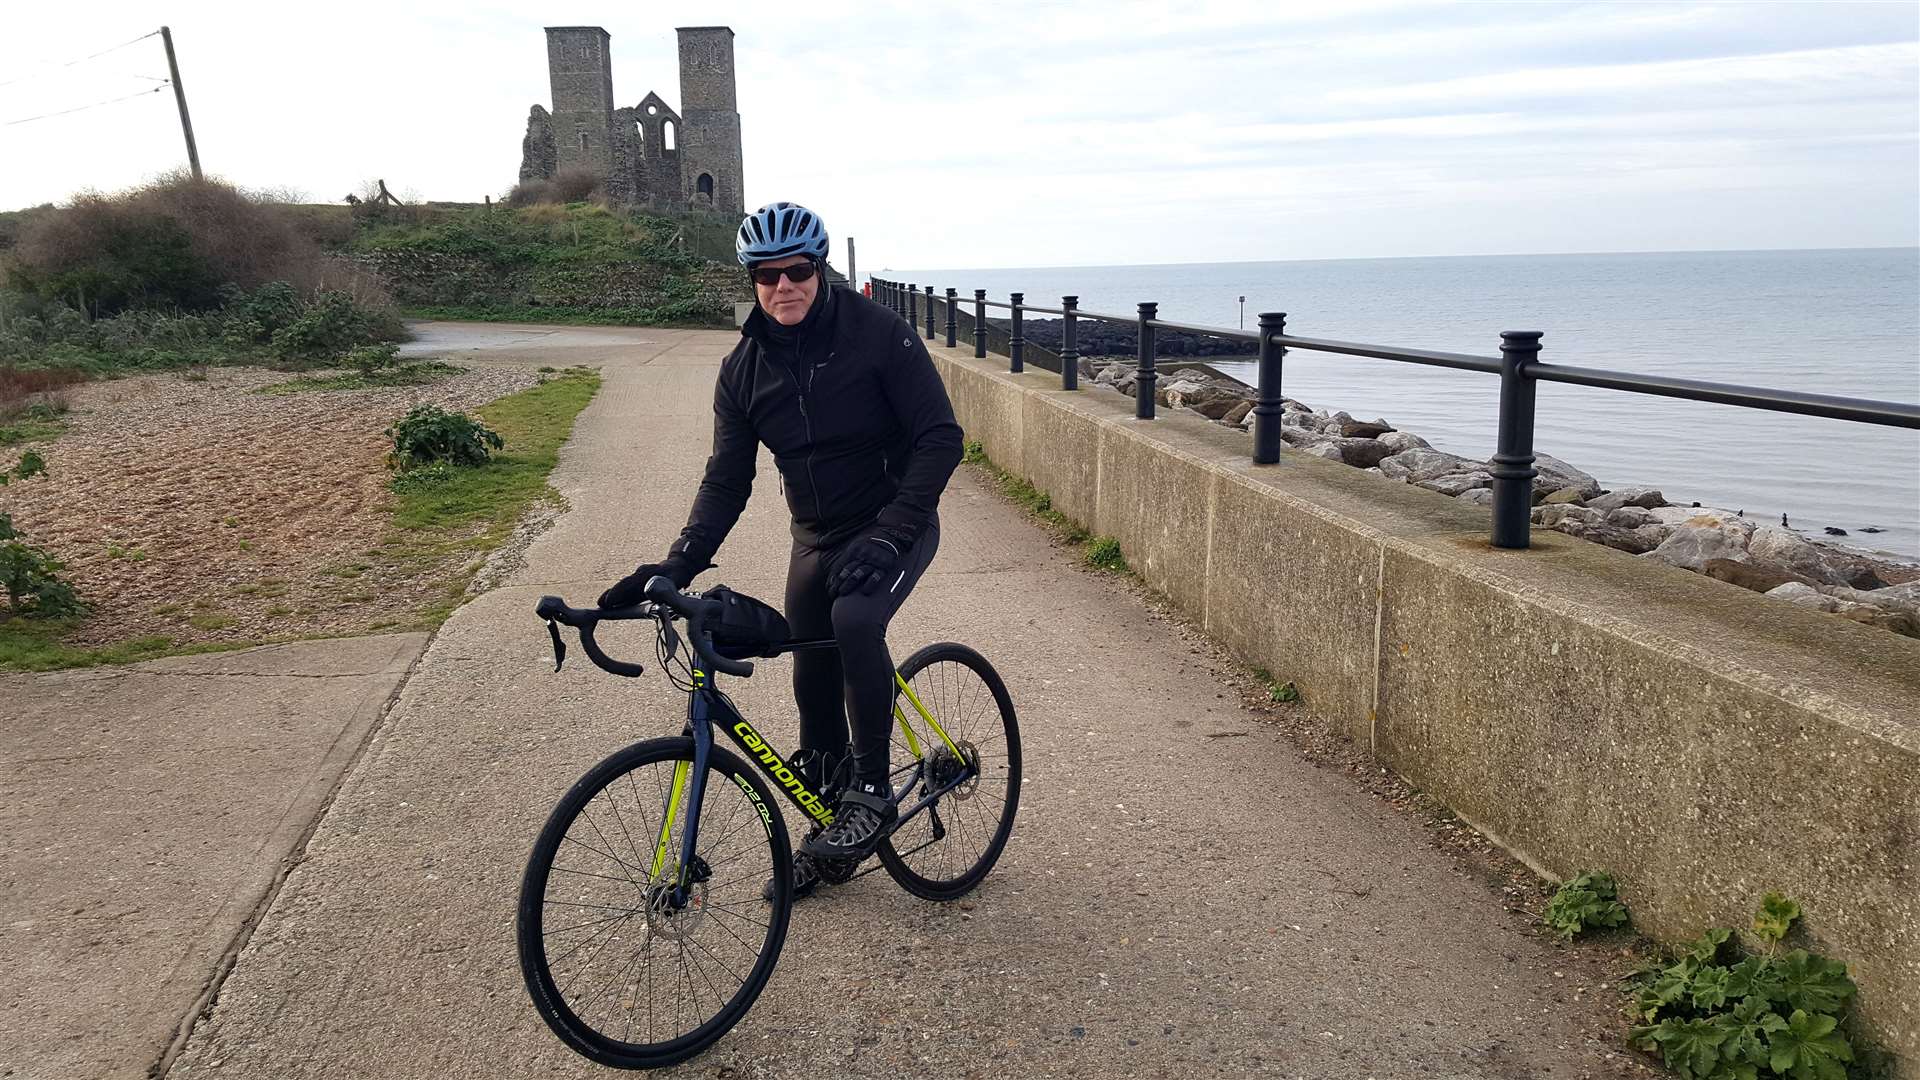 One of the landmarks is the Reculver Towers